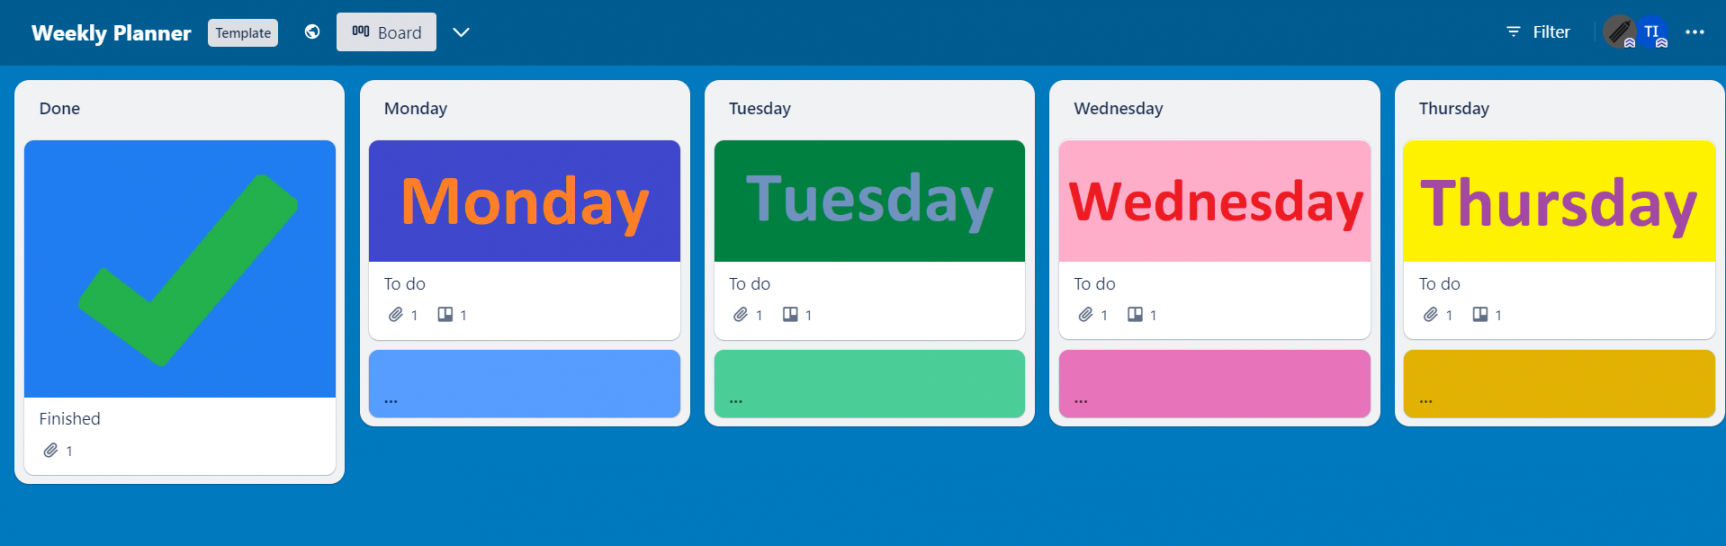 Best Digital Planner That Syncs With Google Calendar - Our